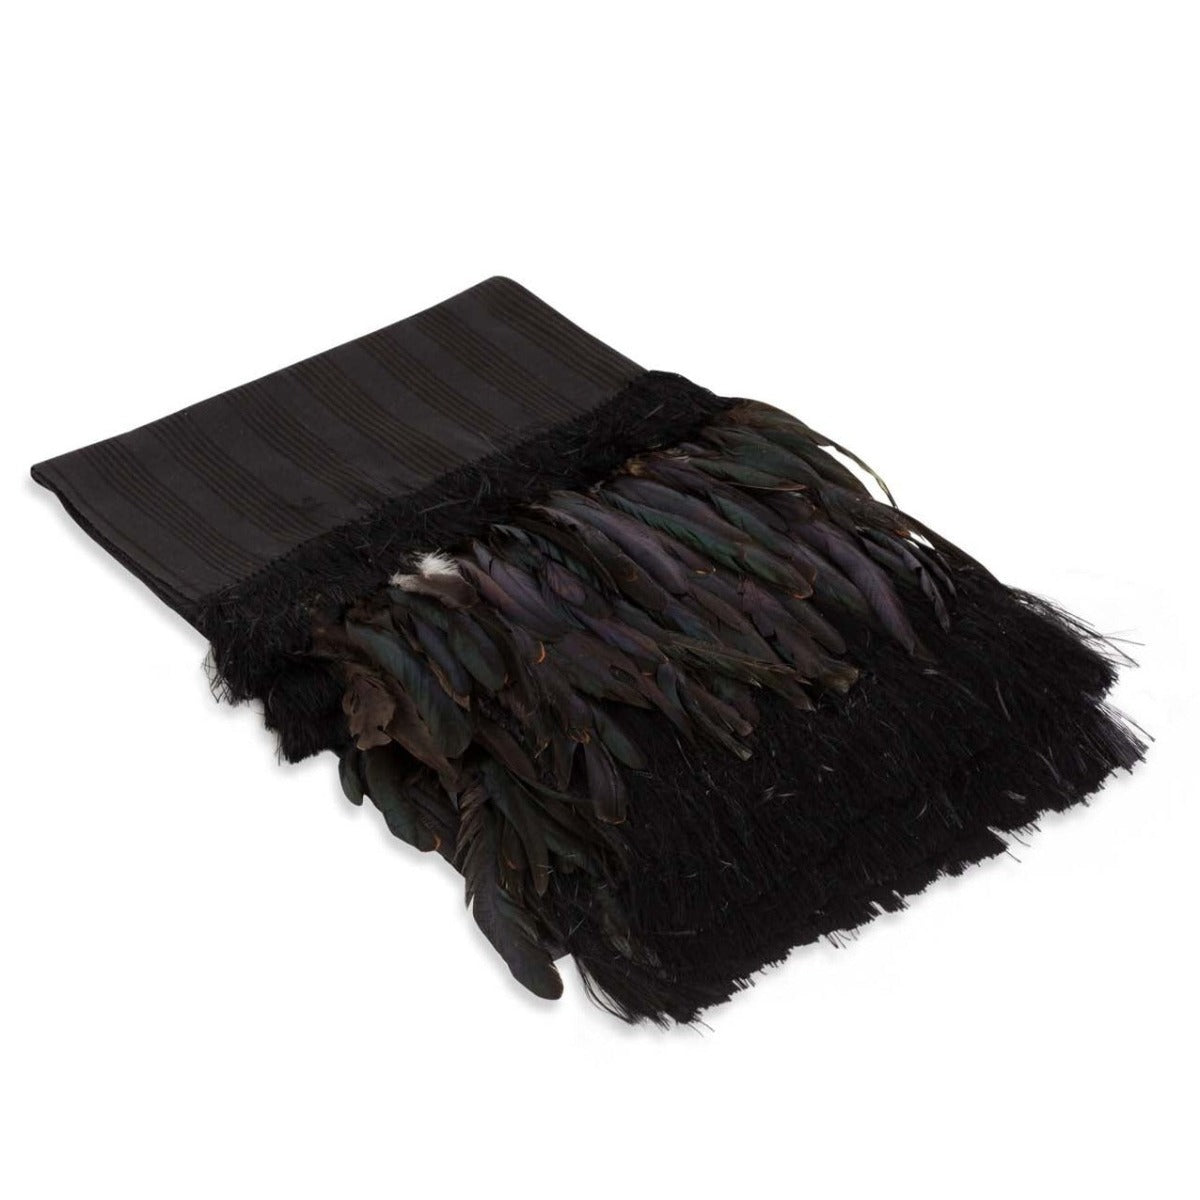 Silk and Cotton Throw/Shawl with Feather Trim